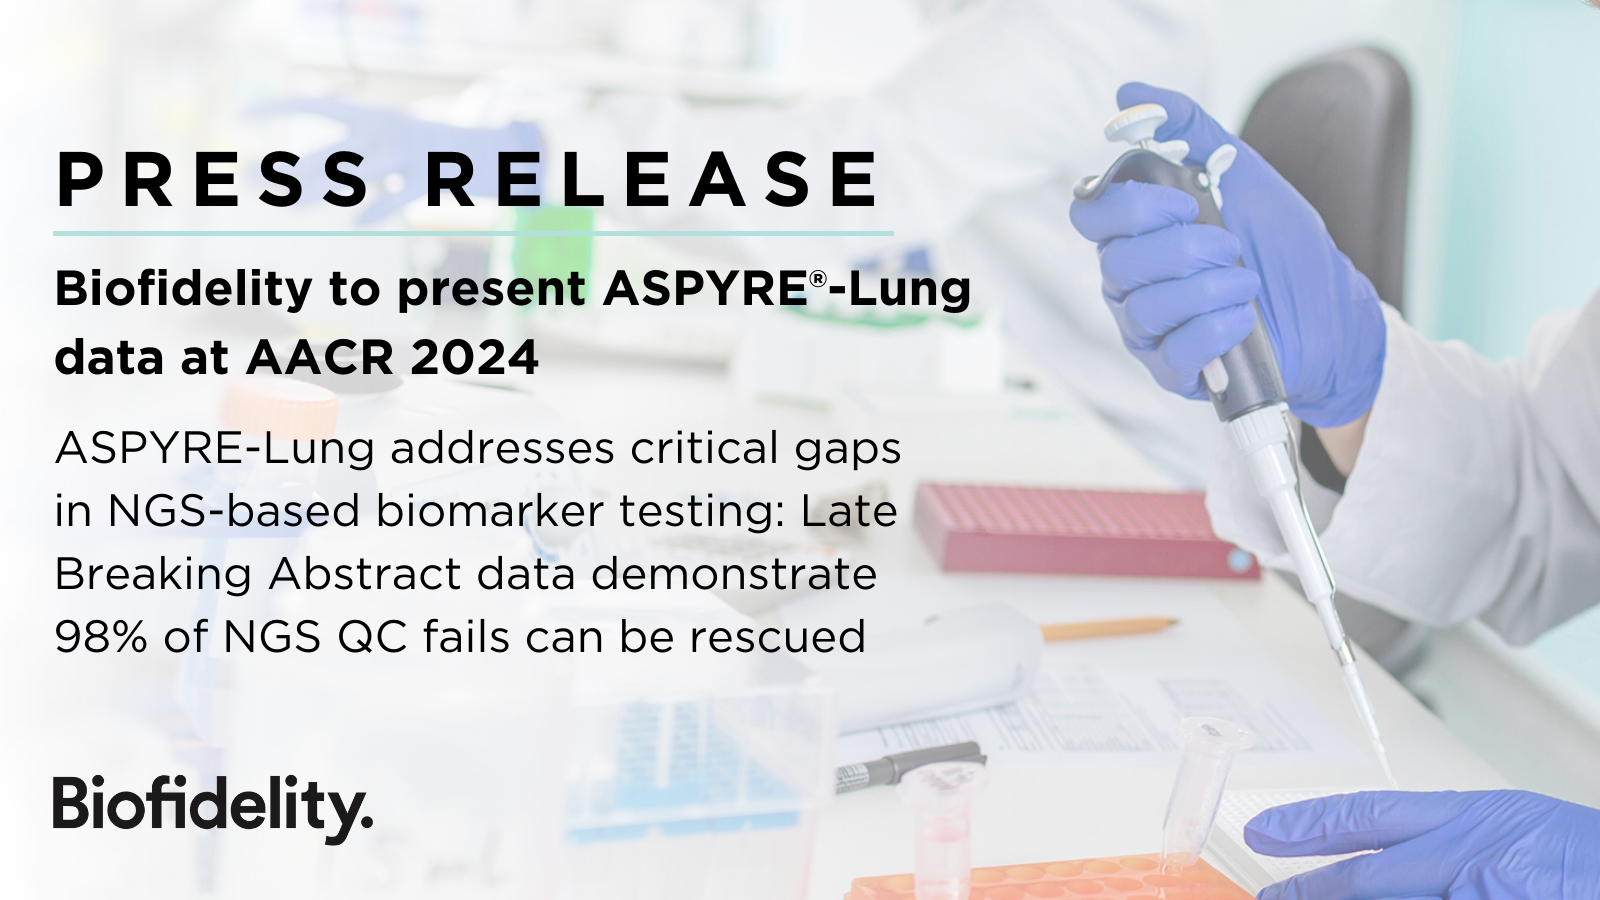 Biofidelity to present ASPYRE®-Lung data at AACR 2024